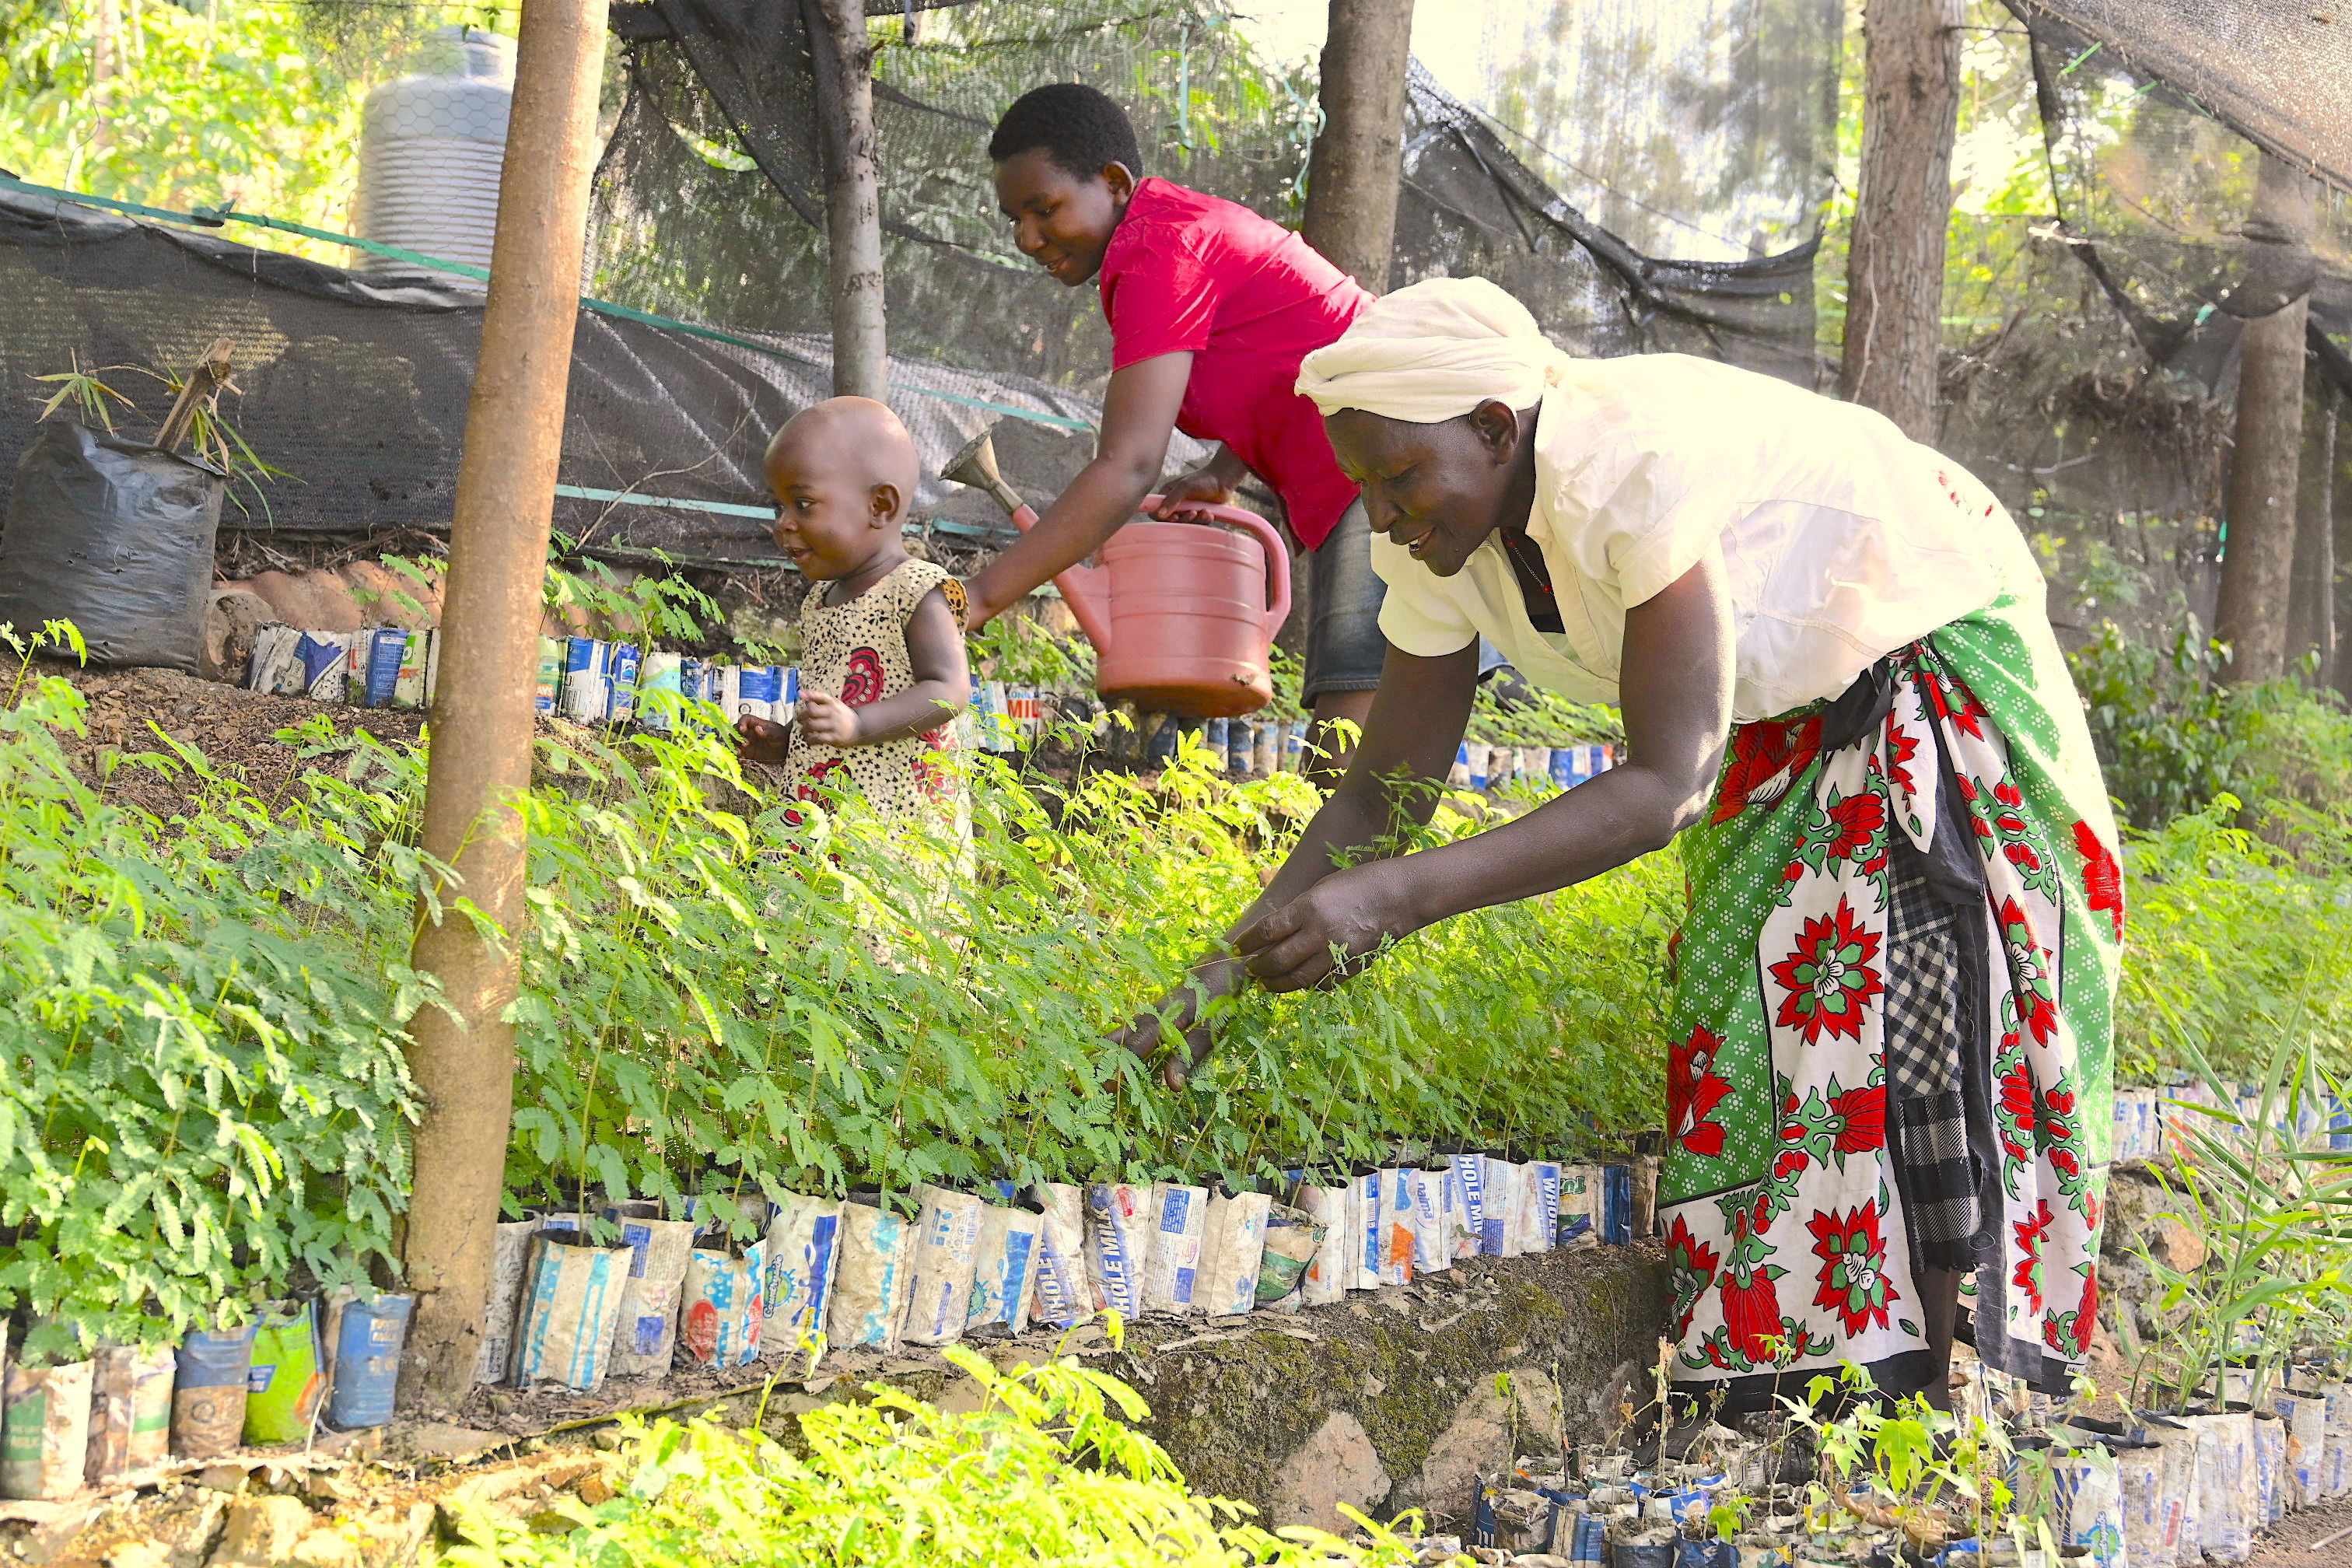 Salome's tree nursery provides her with indigenous tree seedlings that she also avails to the community at affordable prices so as to help increase tree cover in the area.